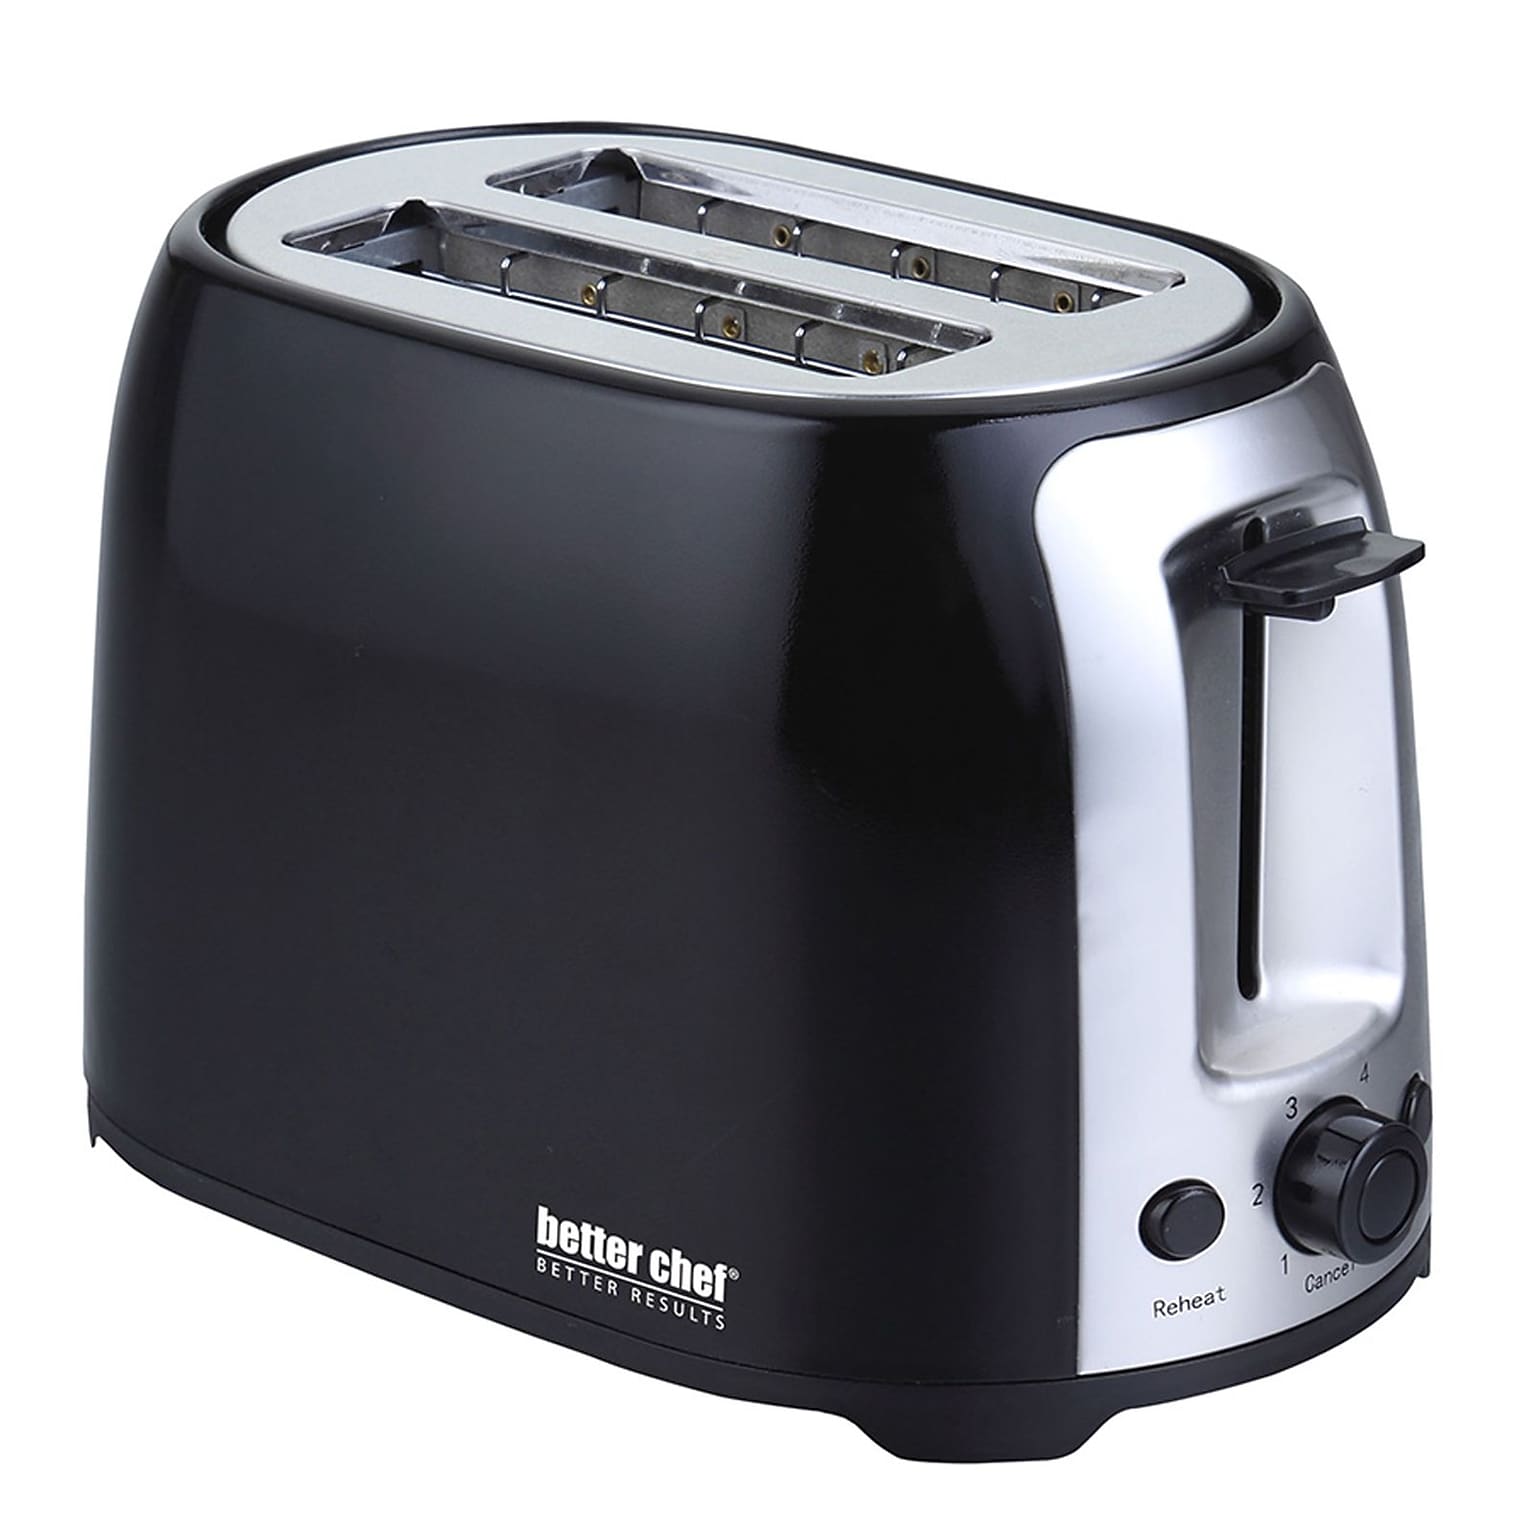 Better Chef 4 Slices Toaster, Black (93595026M)